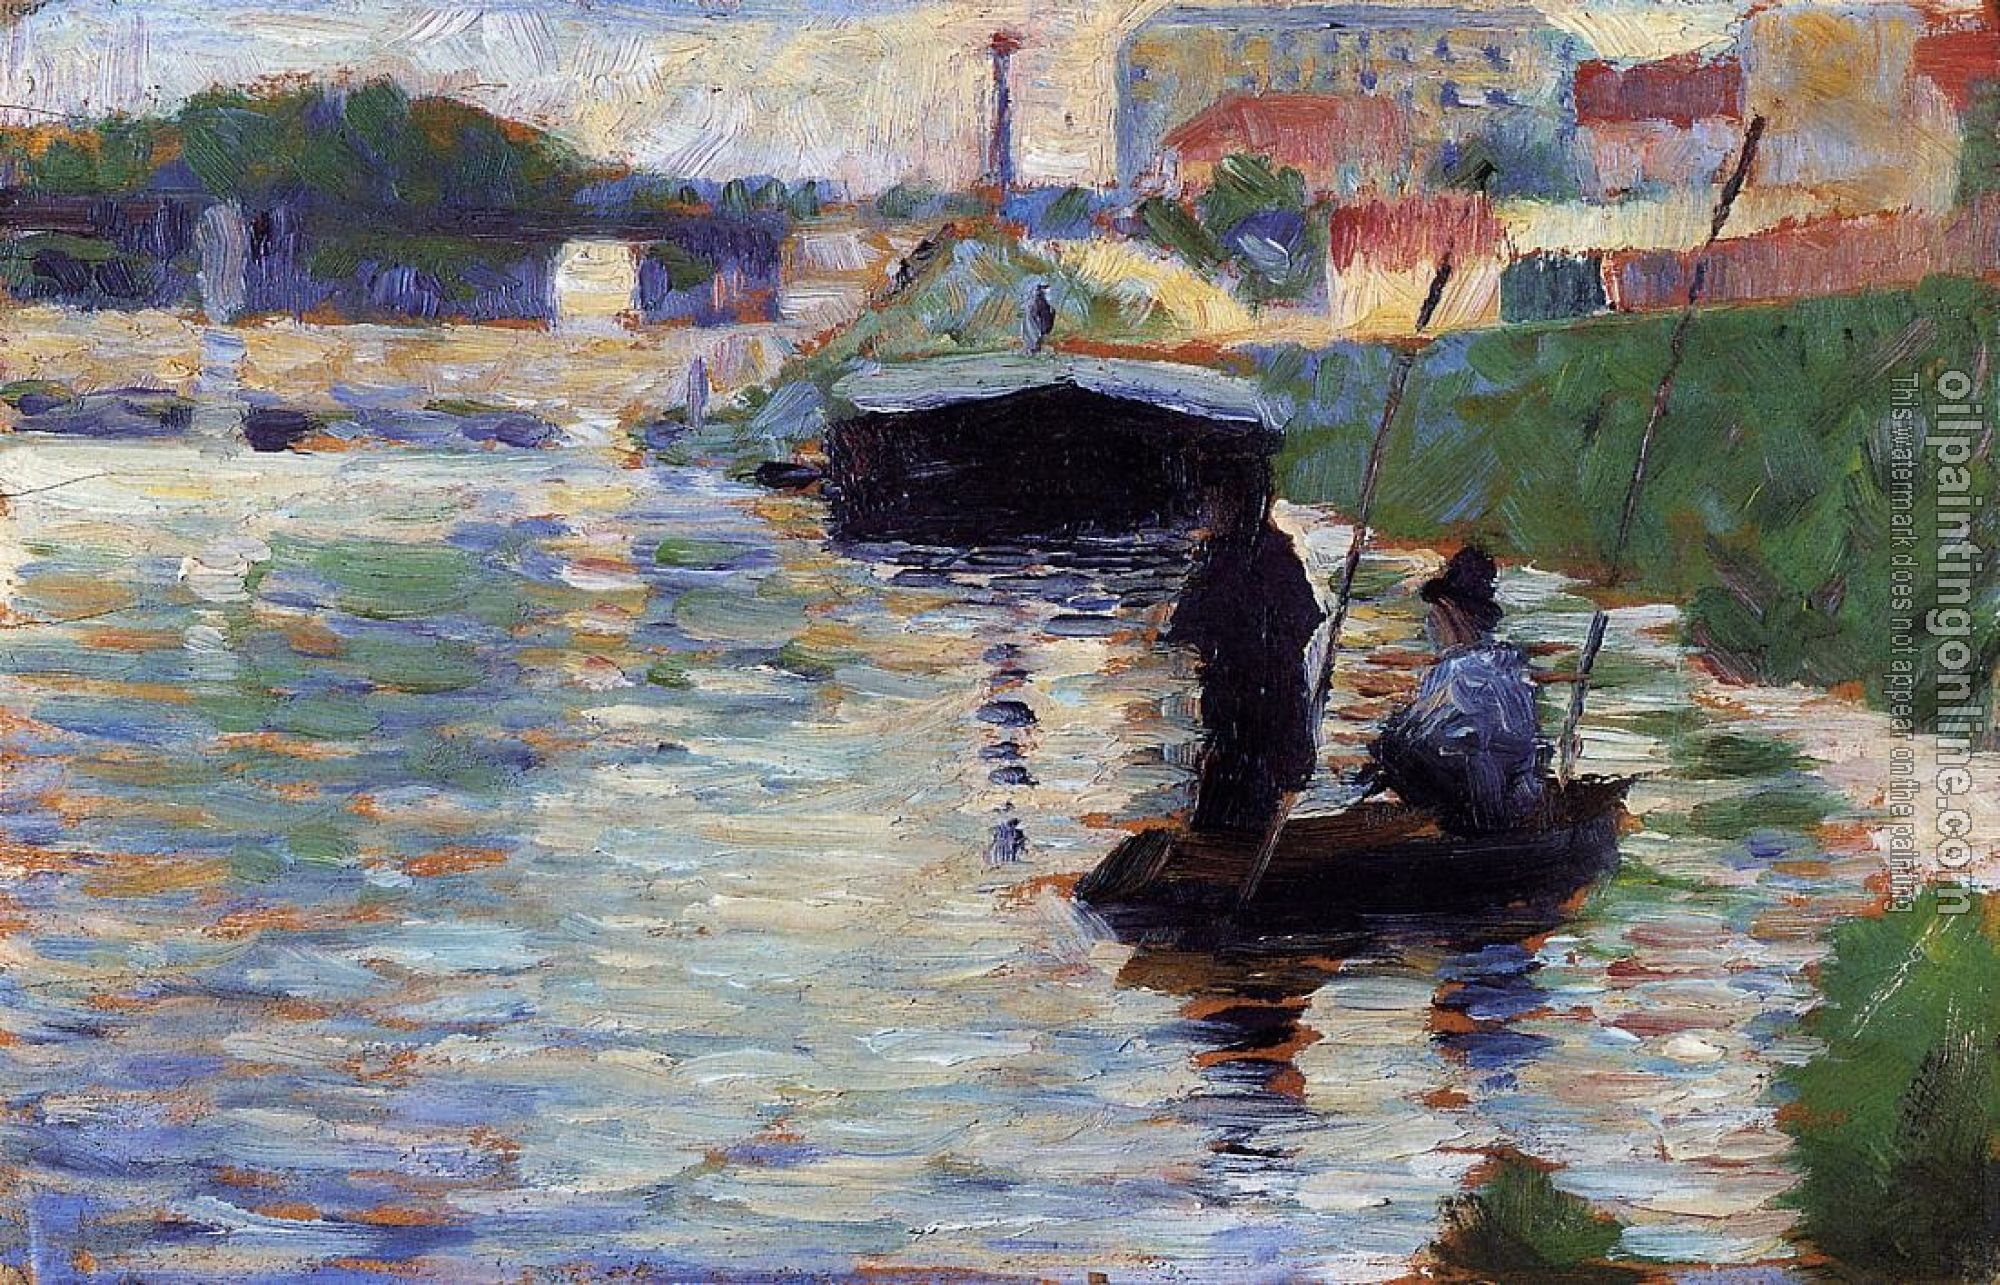 Seurat, Georges - The Bridge, View of the Seine